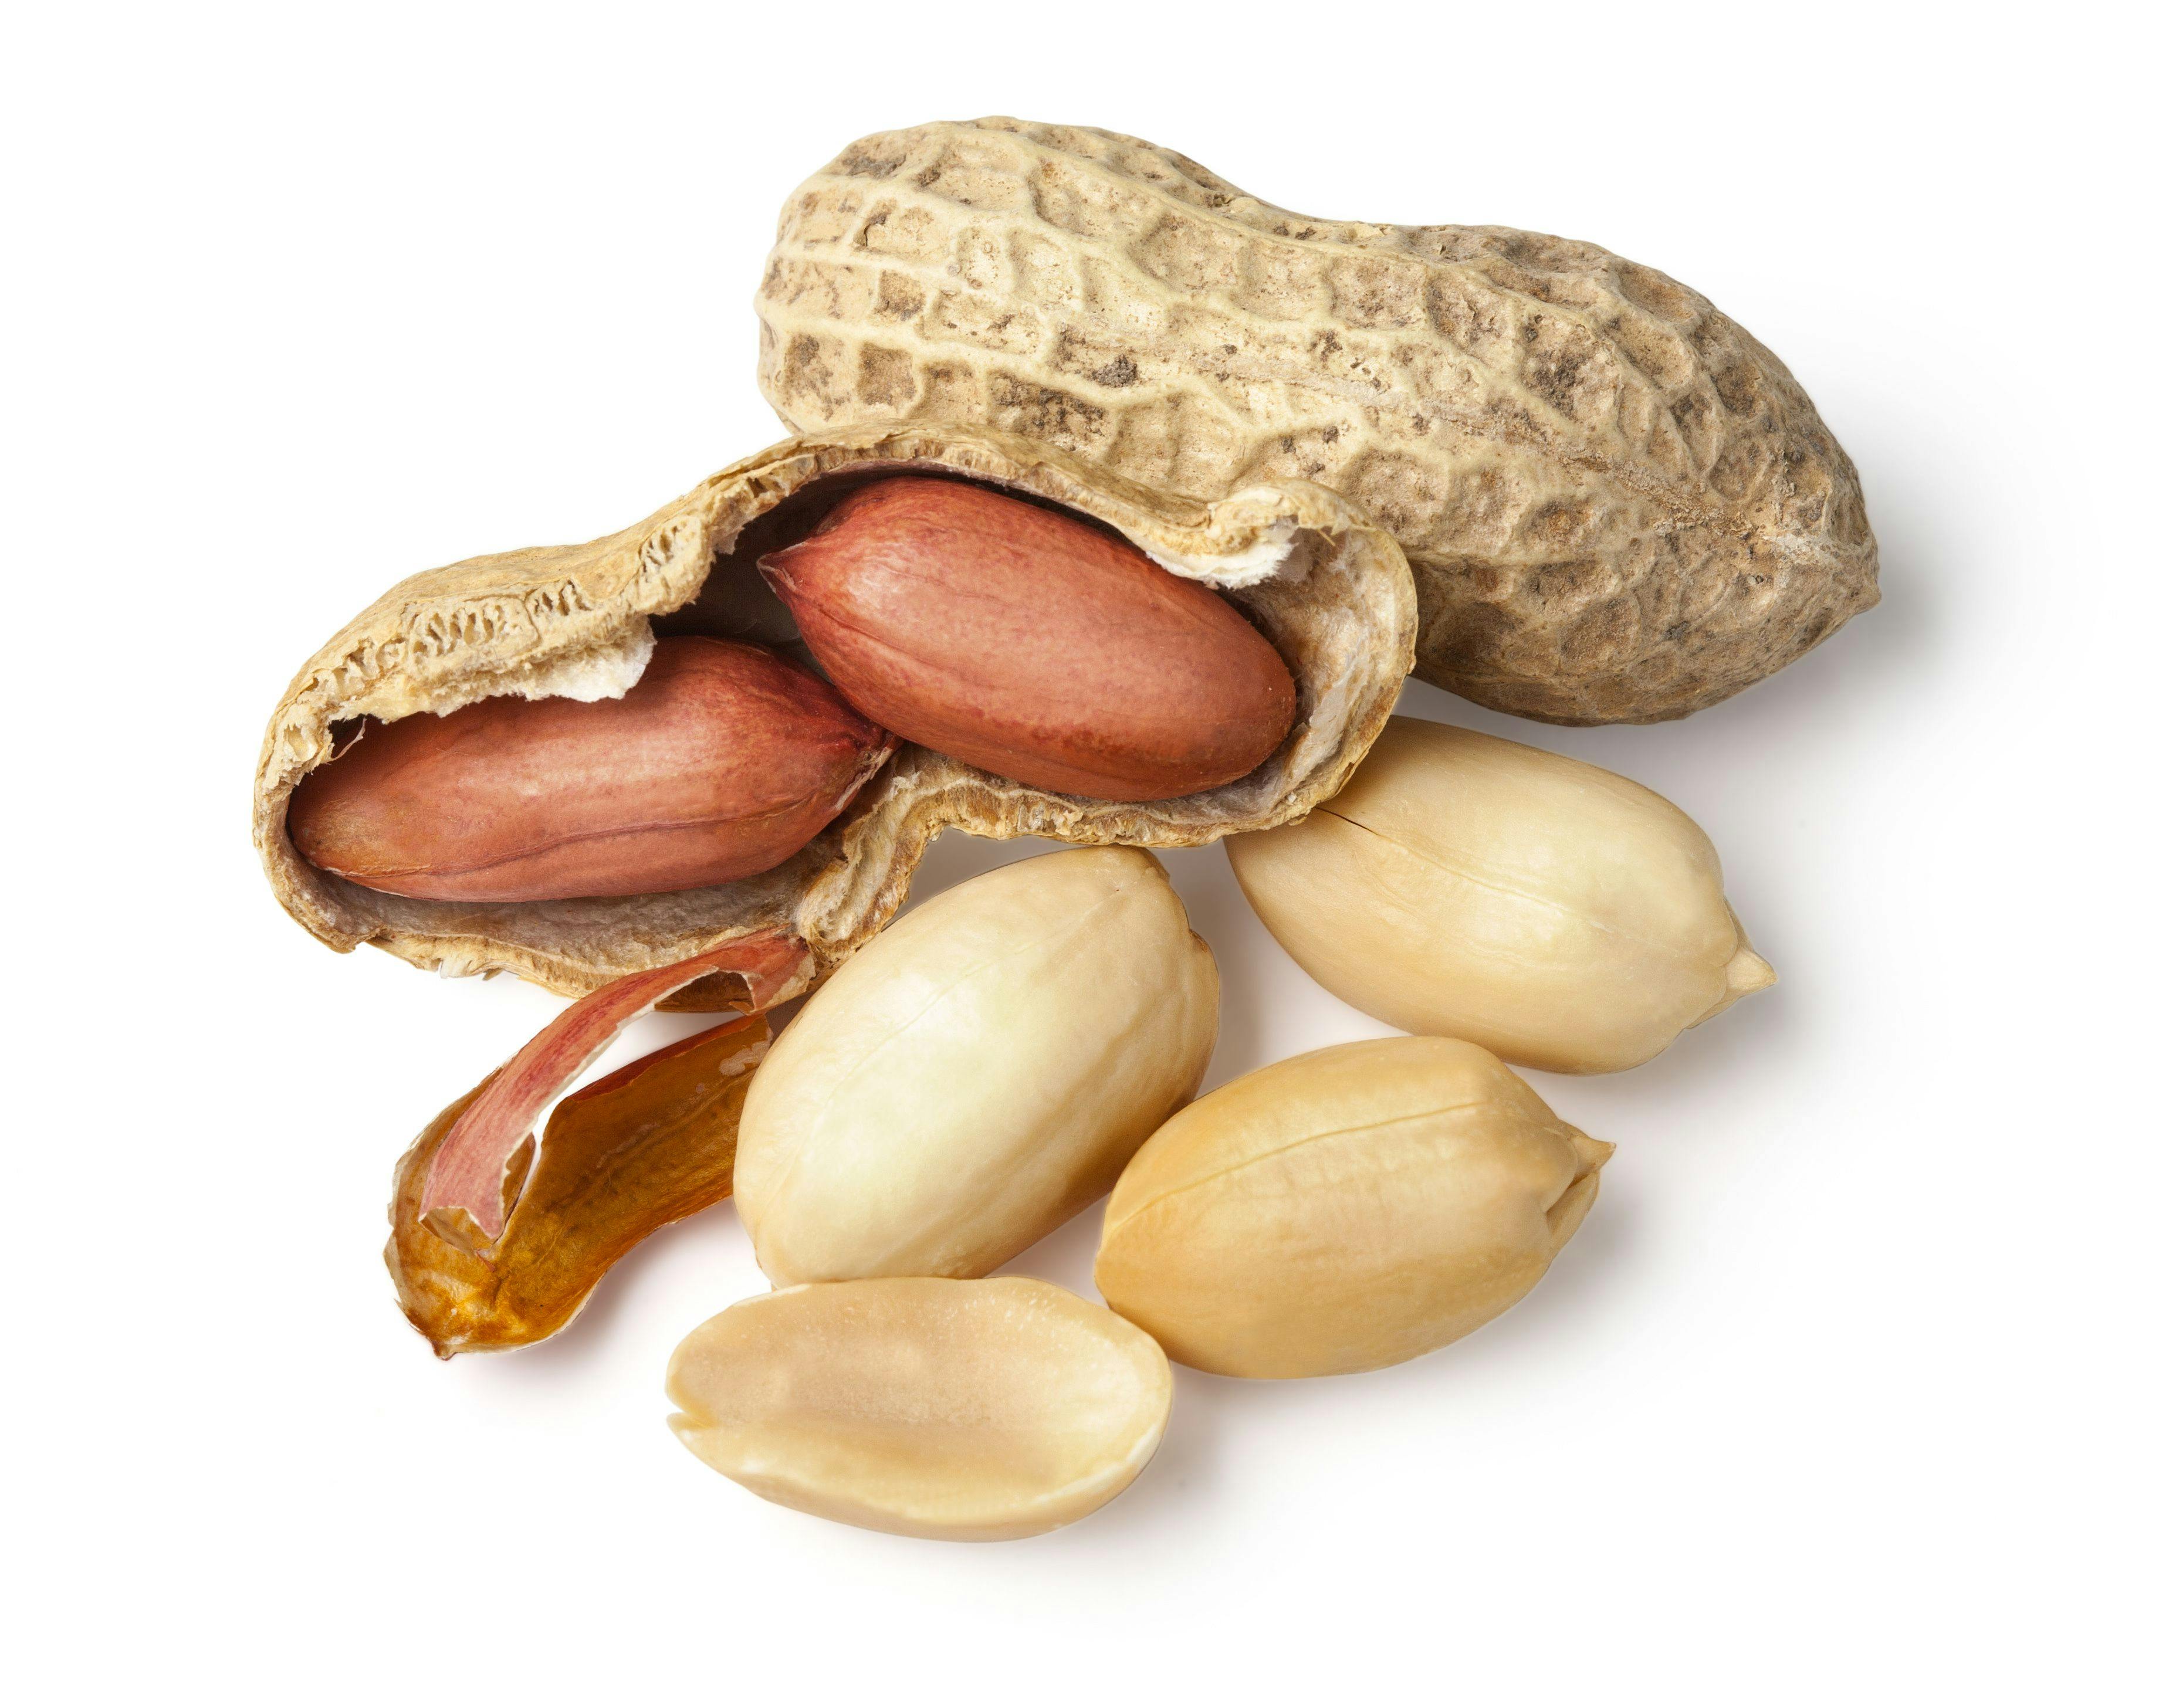 peanuts, FDA approval of first drug to treat peanut allergy